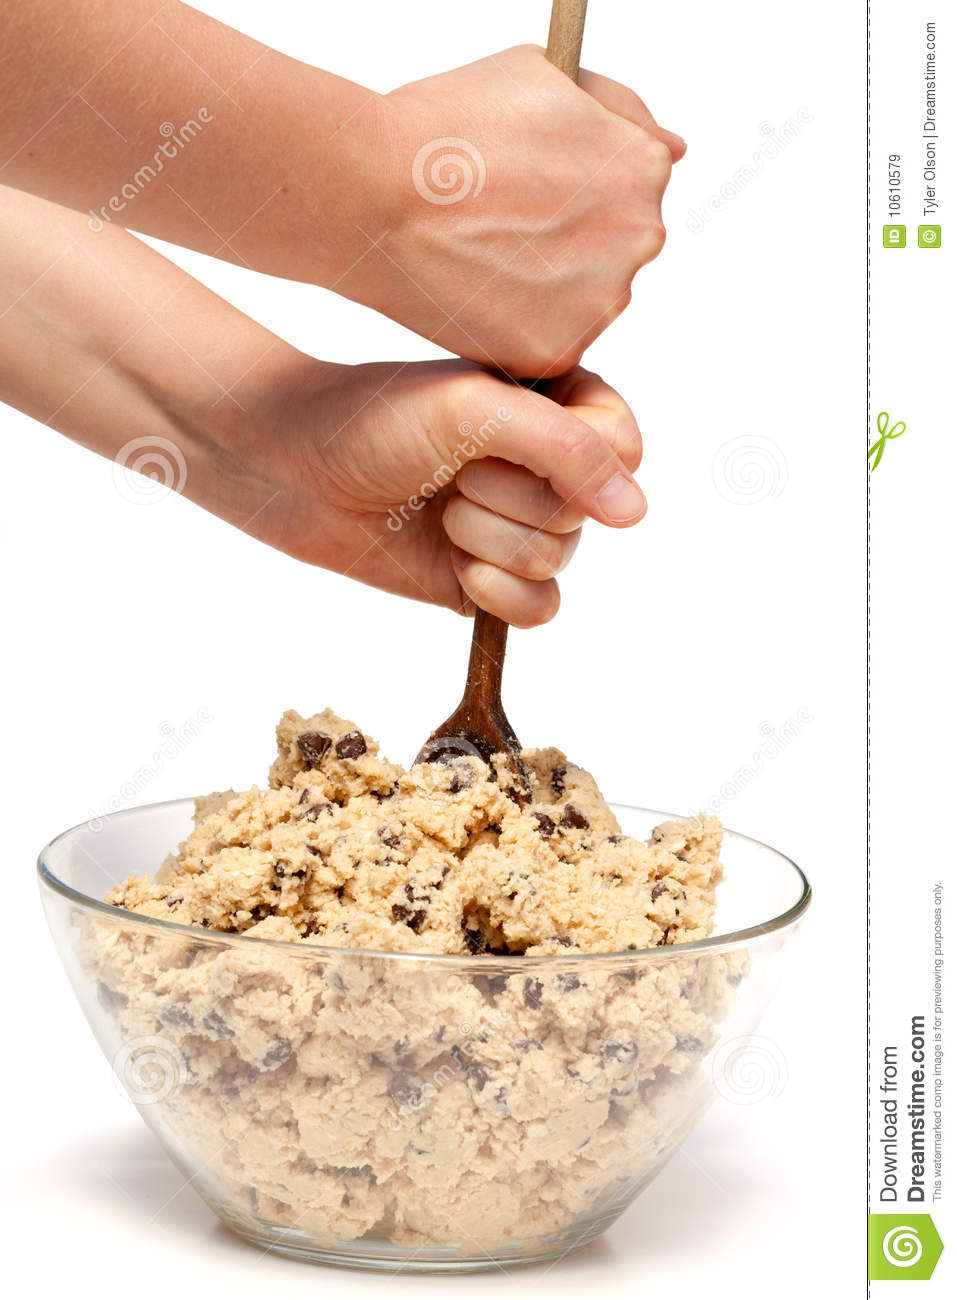 Cookie Dough Mix Royalty Free Stock Images   Image  10610579